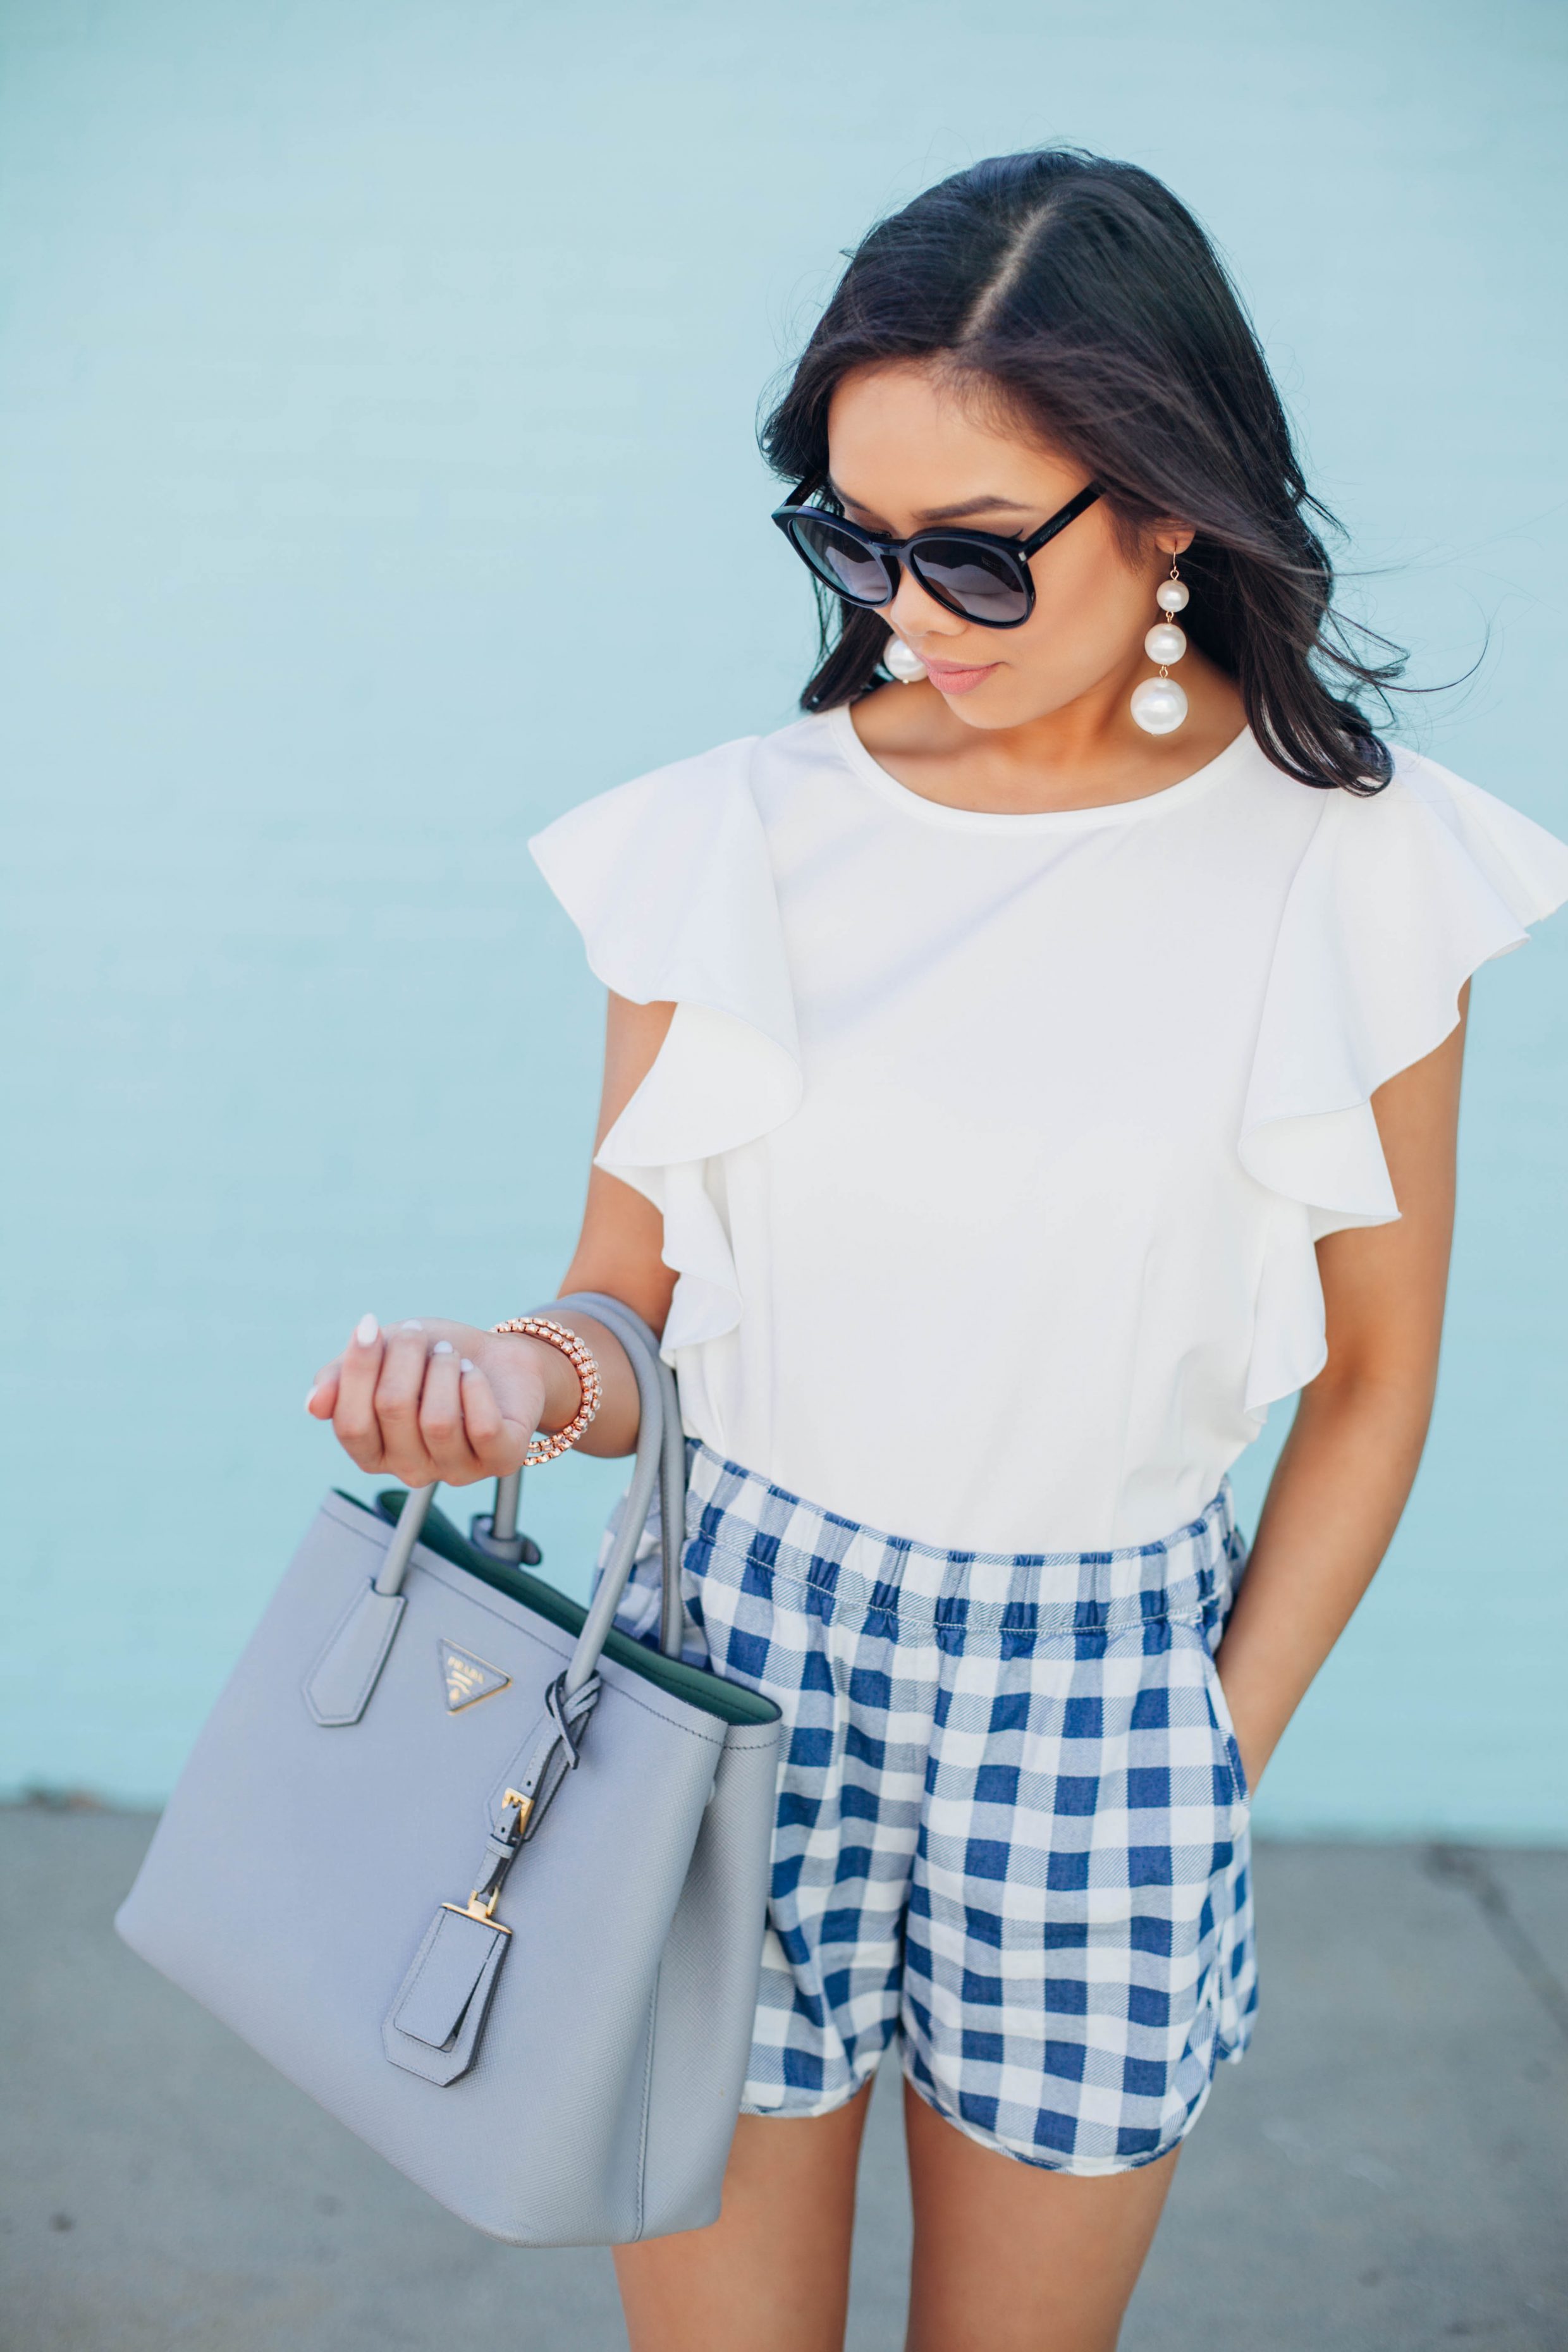 COLOR & CHIC | Gingham shorts for summer